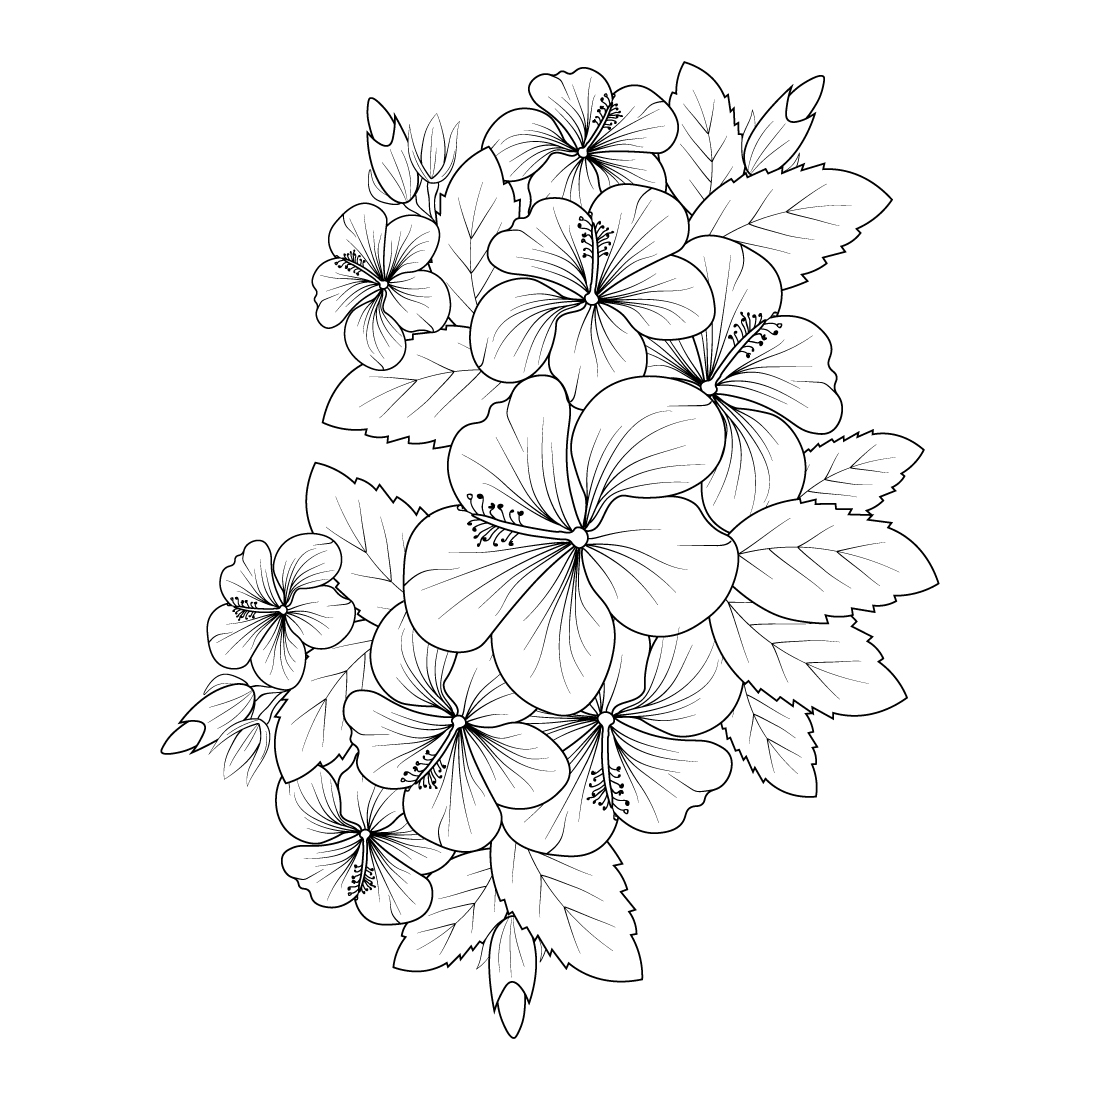 Dahlia flower drawing outline Royalty Free Vector Image